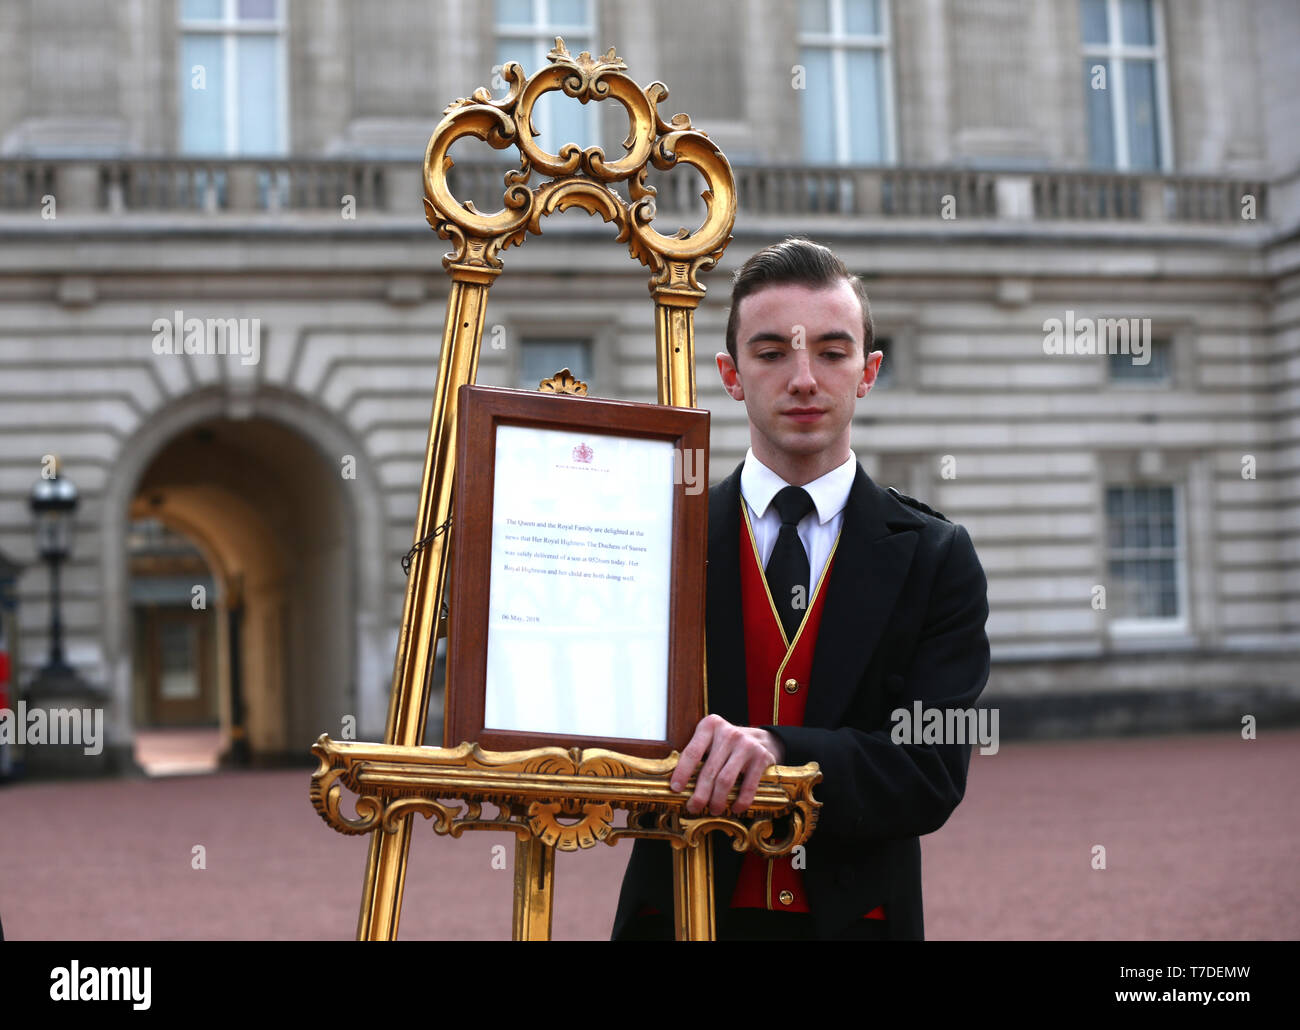 Footmen Stephen Kelly brings out the easel in the forecourt of Buckingham Palace in London to formally announce the birth of a baby boy to the Duke and Duchess of Sussex. Stock Photo